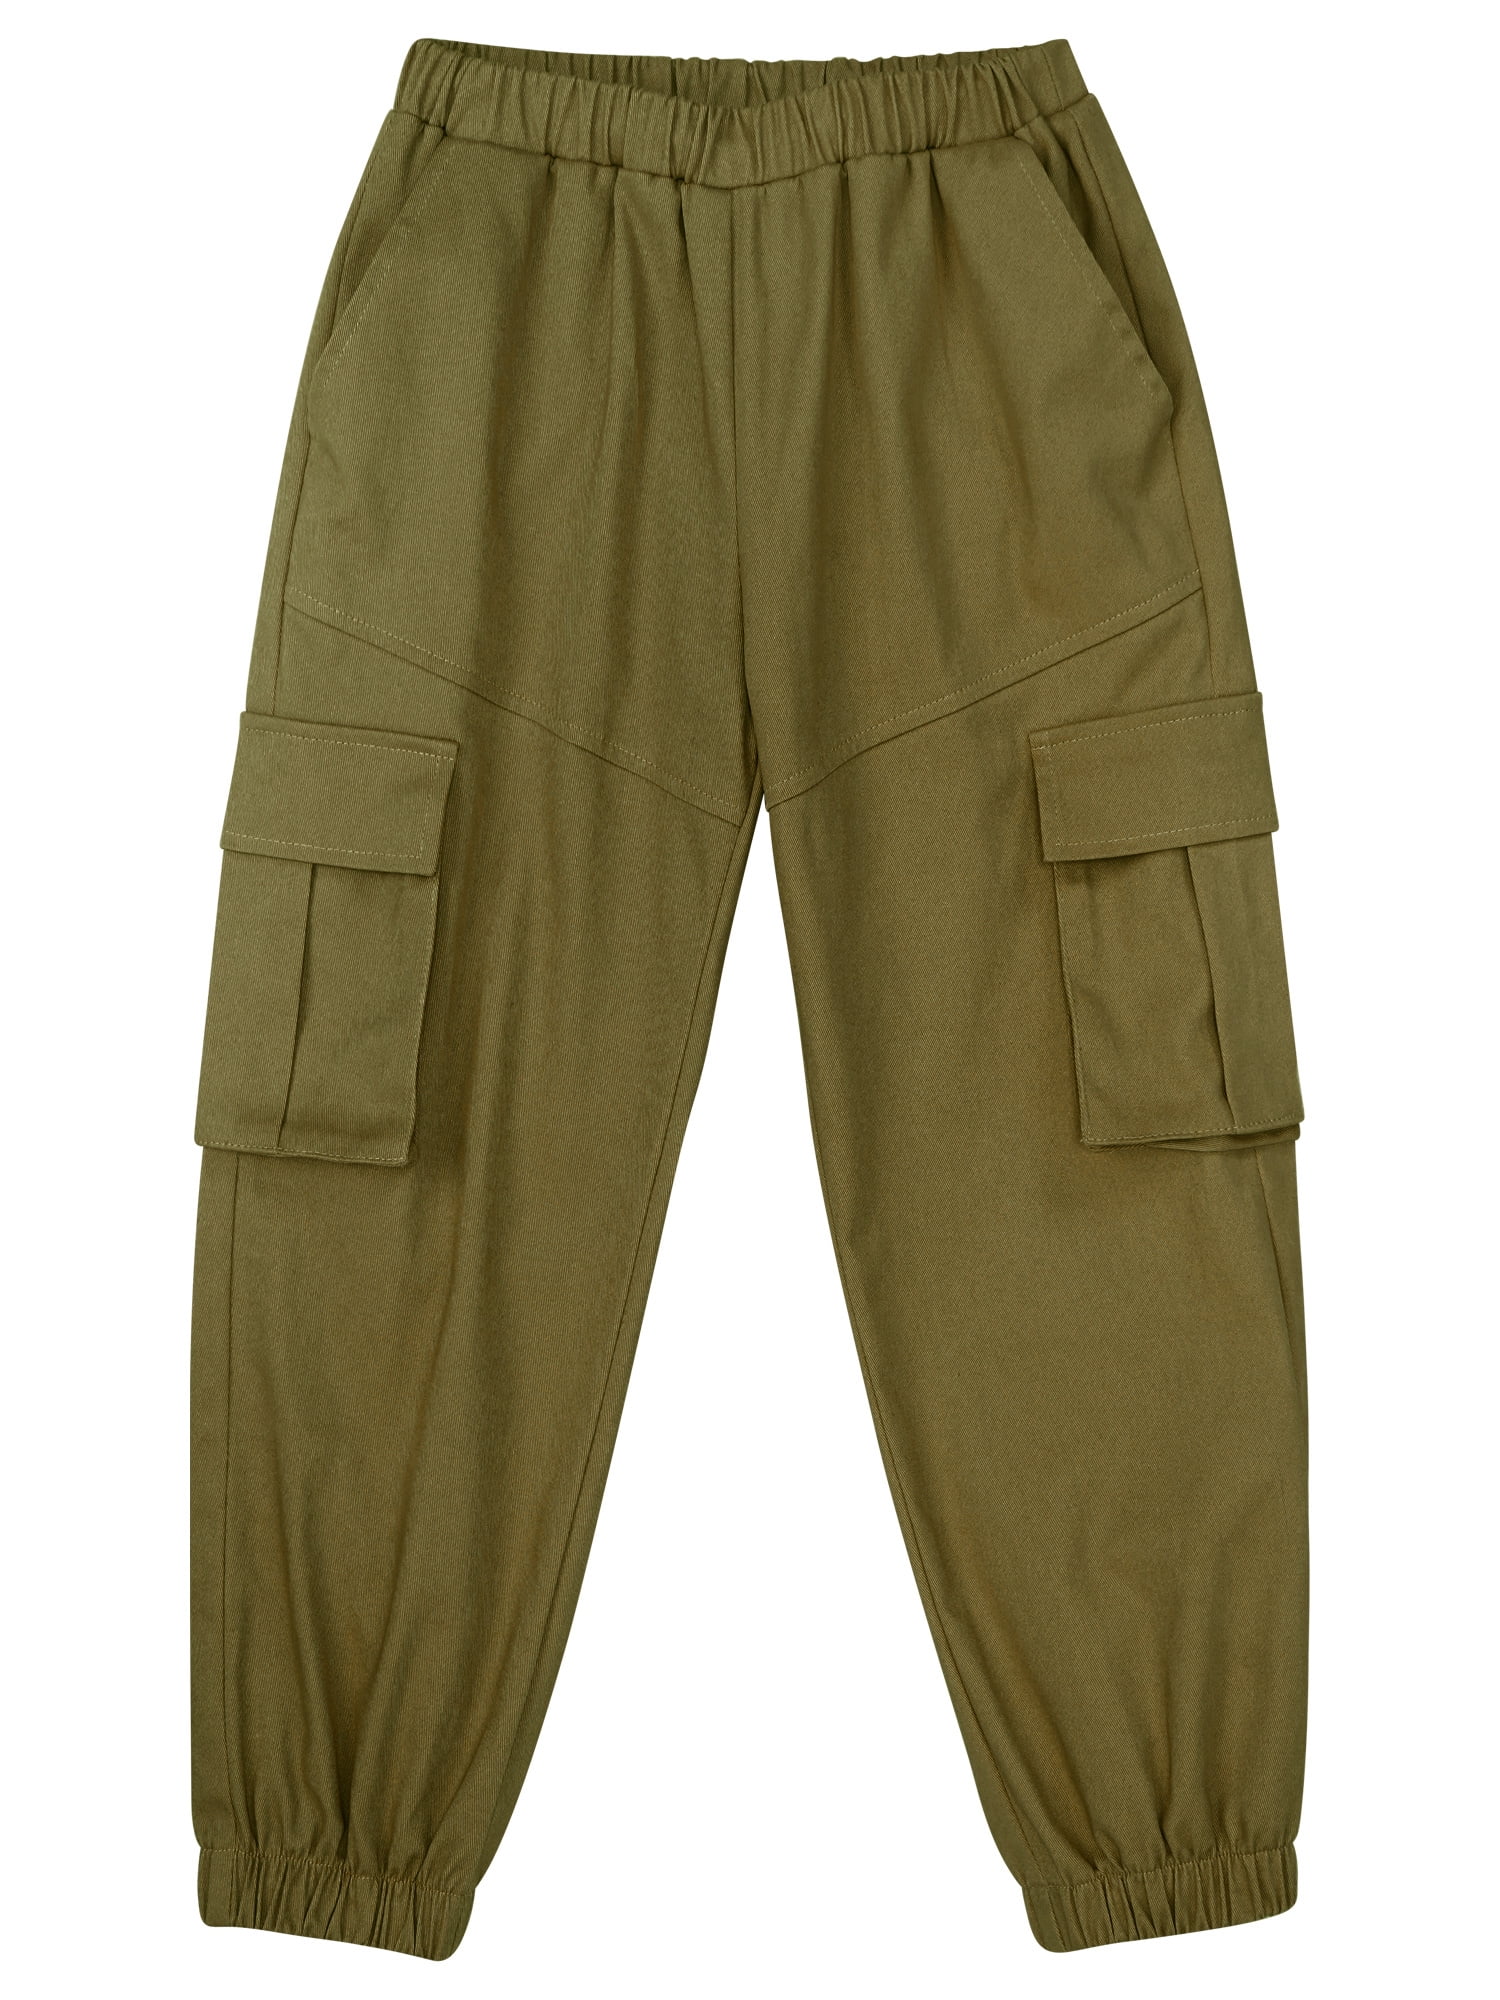 Kids Casual YiZYiF Moisture-Wicking Cargo Army 6-14 Dungarees Pants,Sizes Green Boys 14